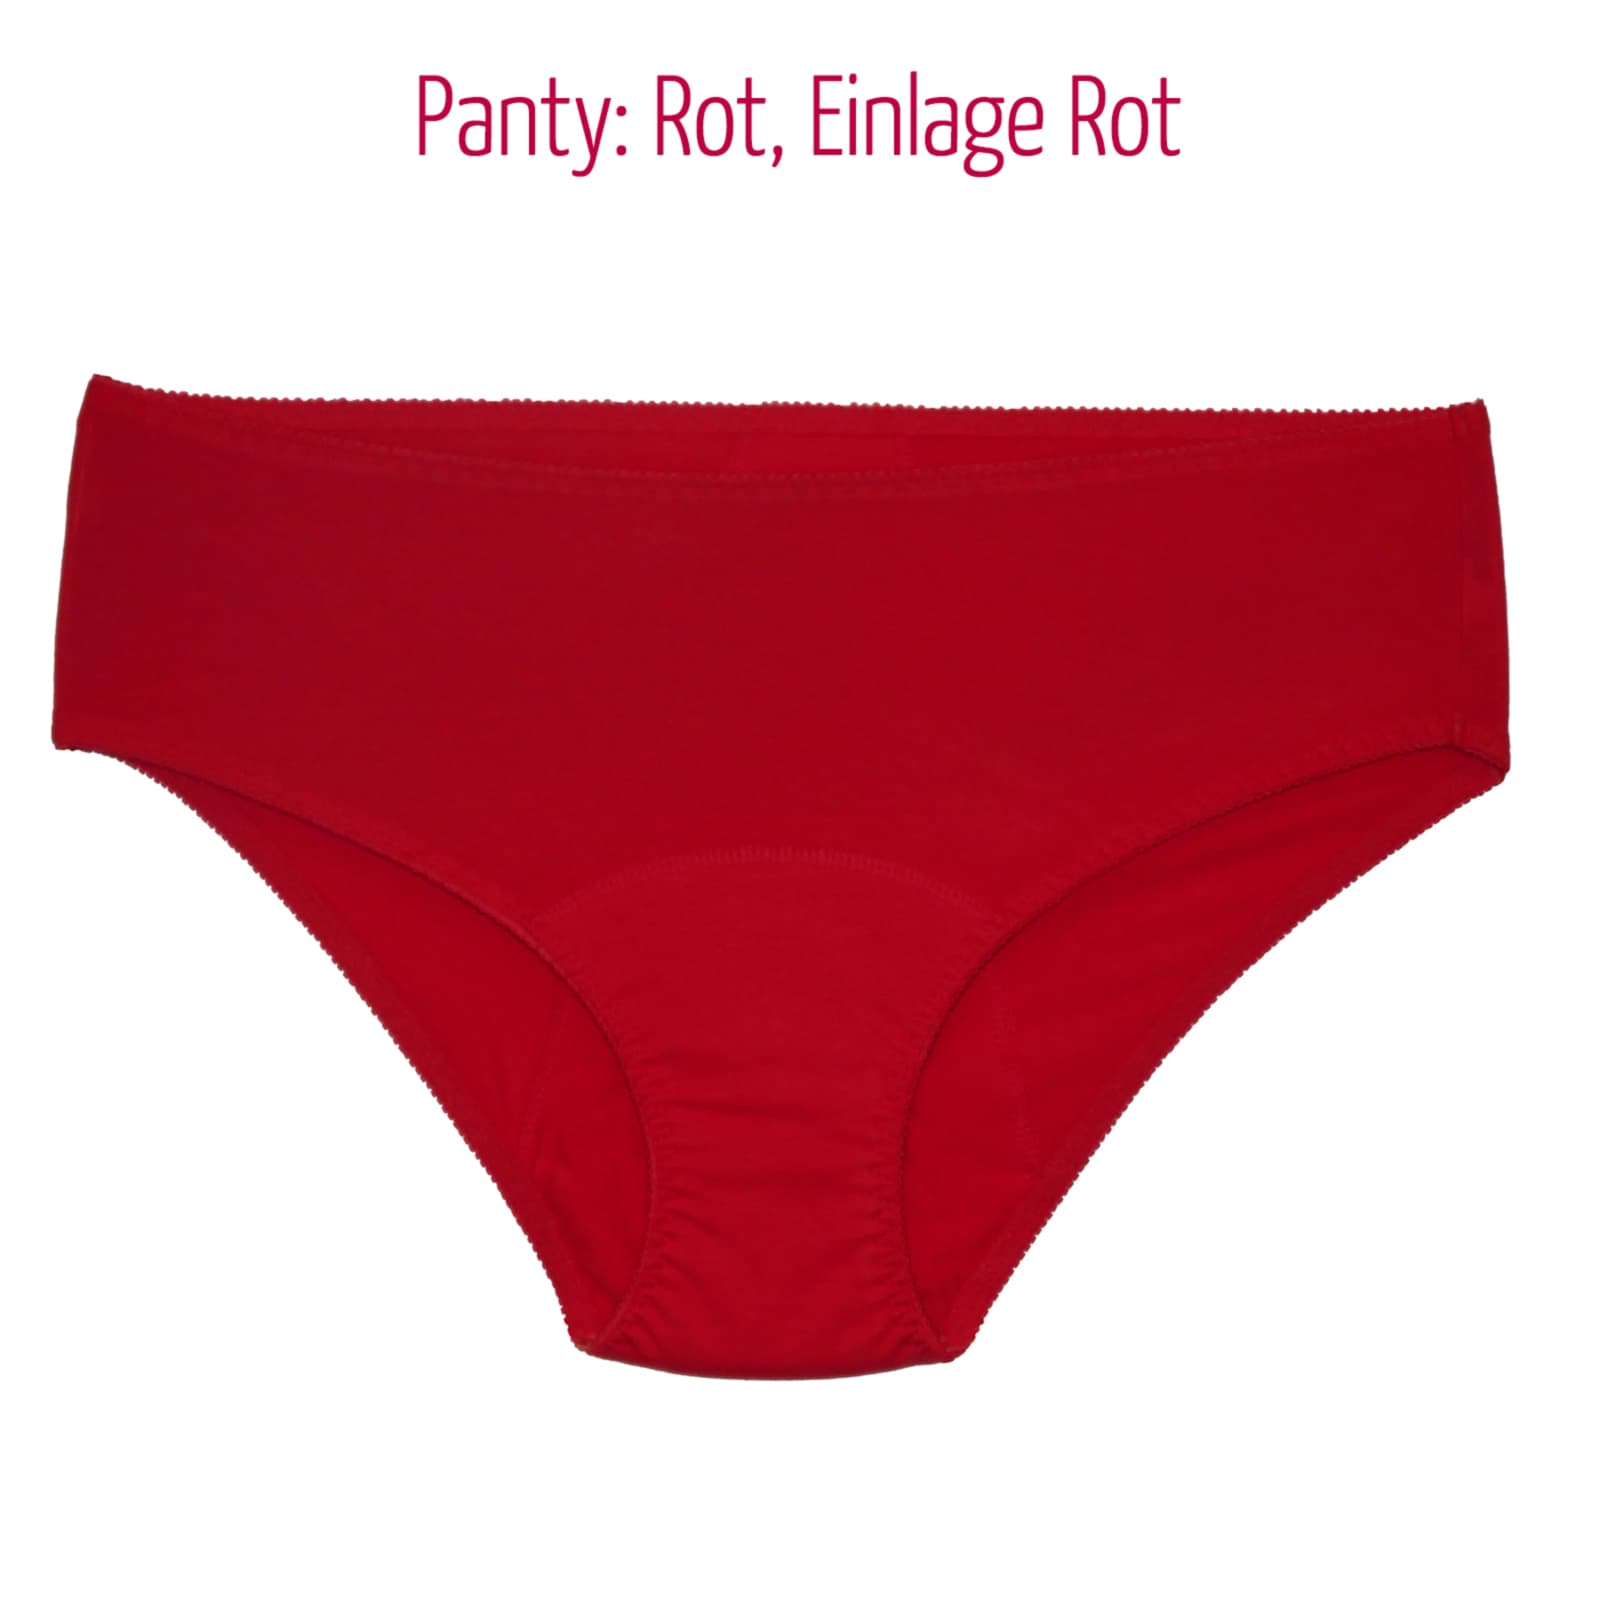 Period panties - ALMO - Organic Panty Liners, Cloth Bandages & more